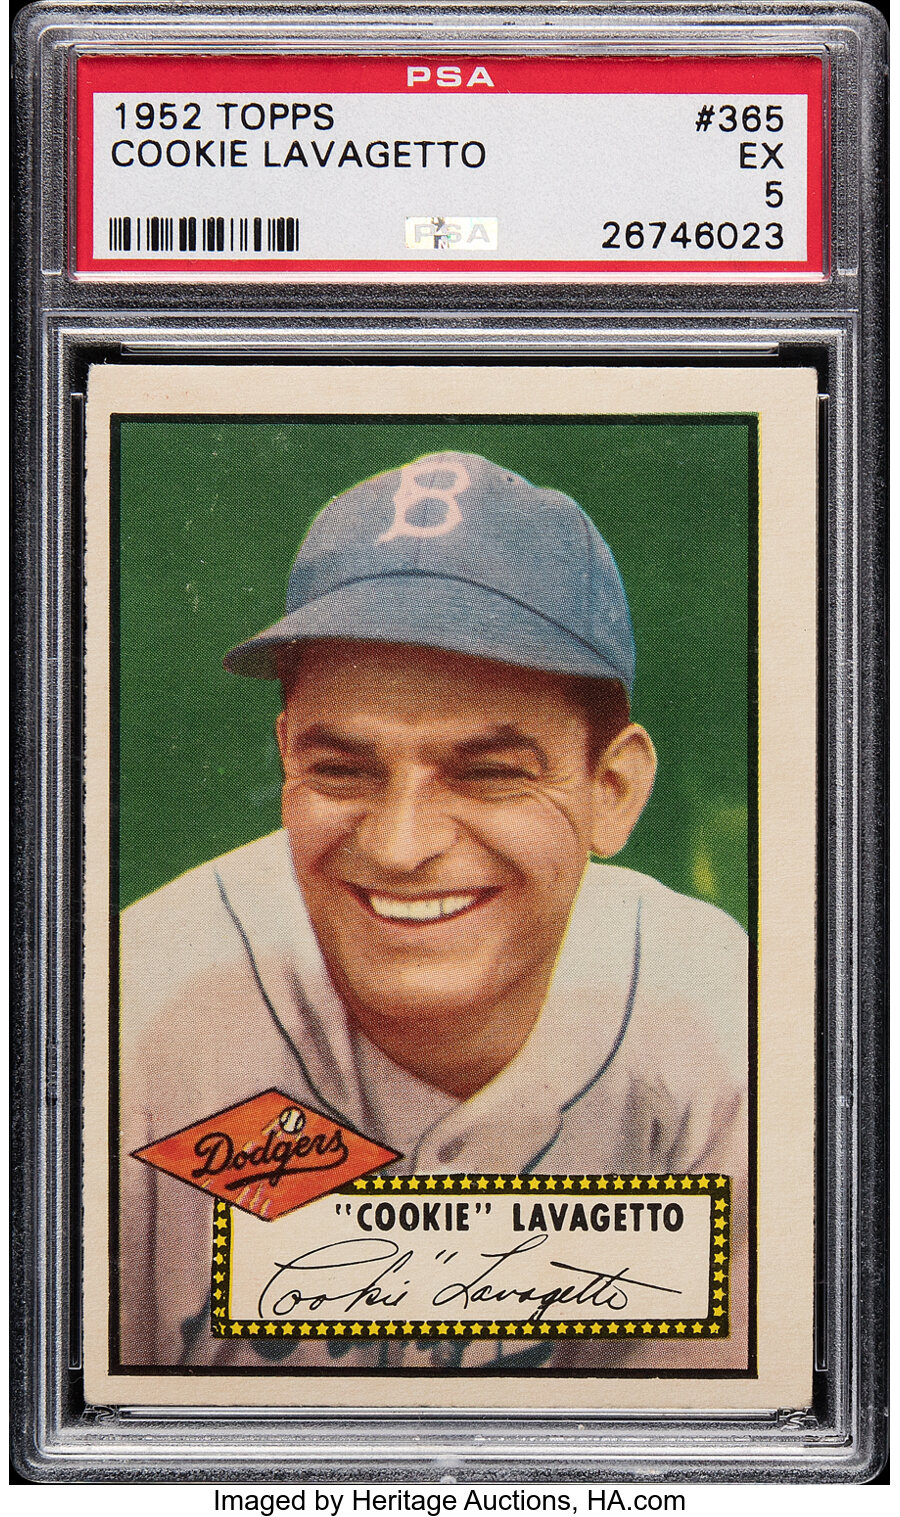 1952 Topps Cookie Lavagetto #365 PSA EX 5